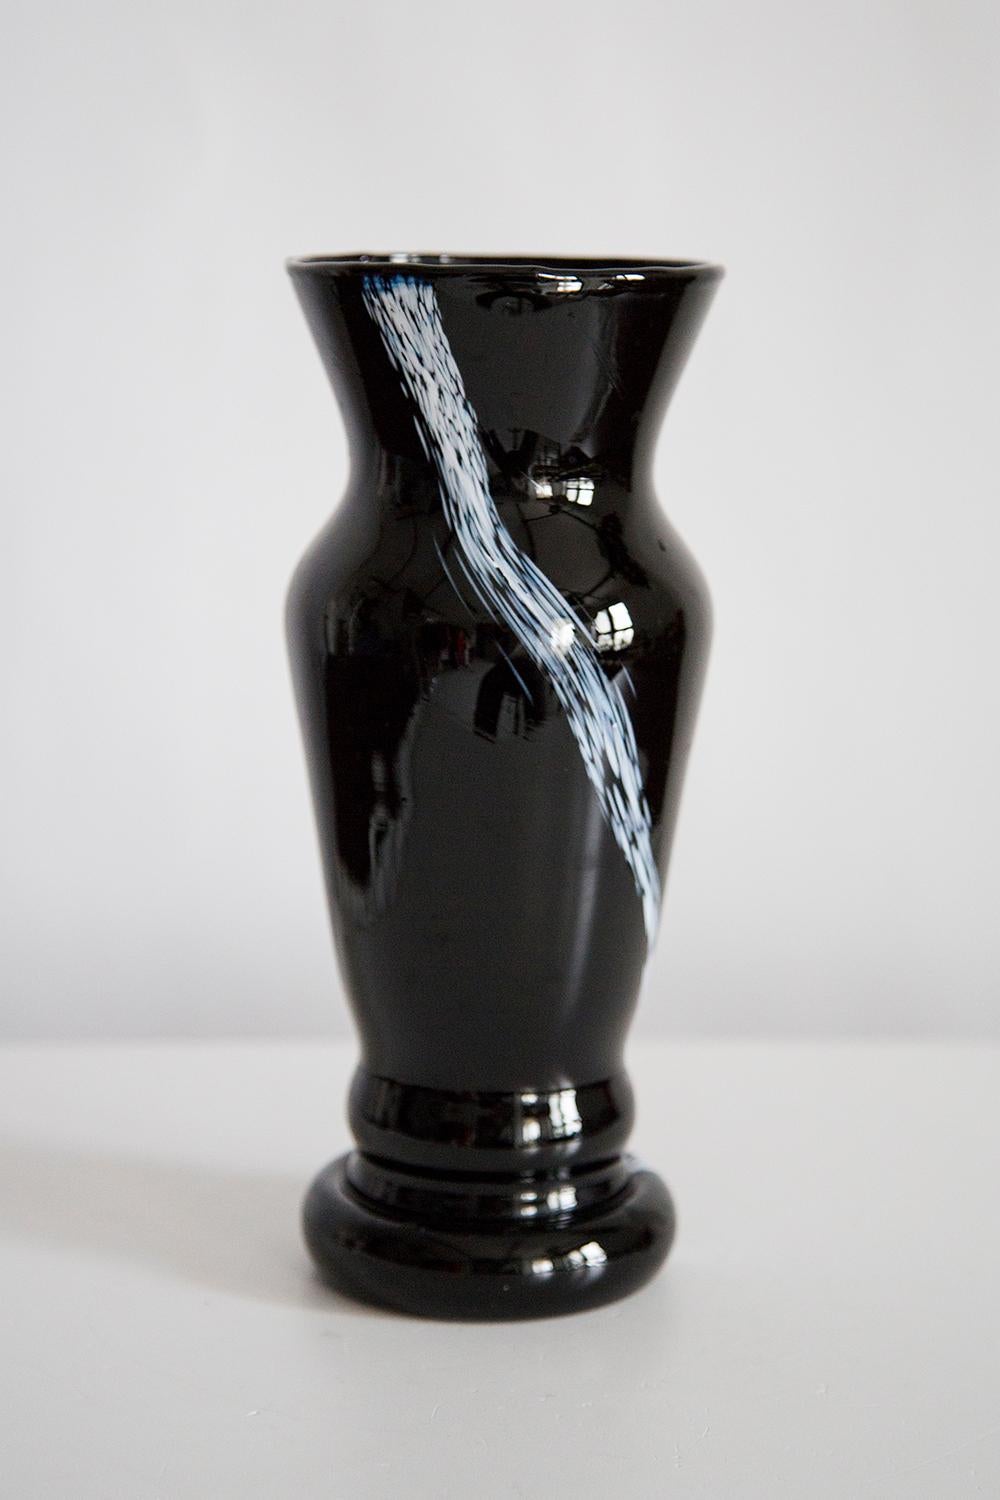 Black and white vase in amazing organic shape. 
Produced in 1960s. Glass in perfect condition. 
The vase looks like it has just been taken out of the box.

No jags, defects, etc. The outer relief surface, the inner smooth. Thick glass vase,